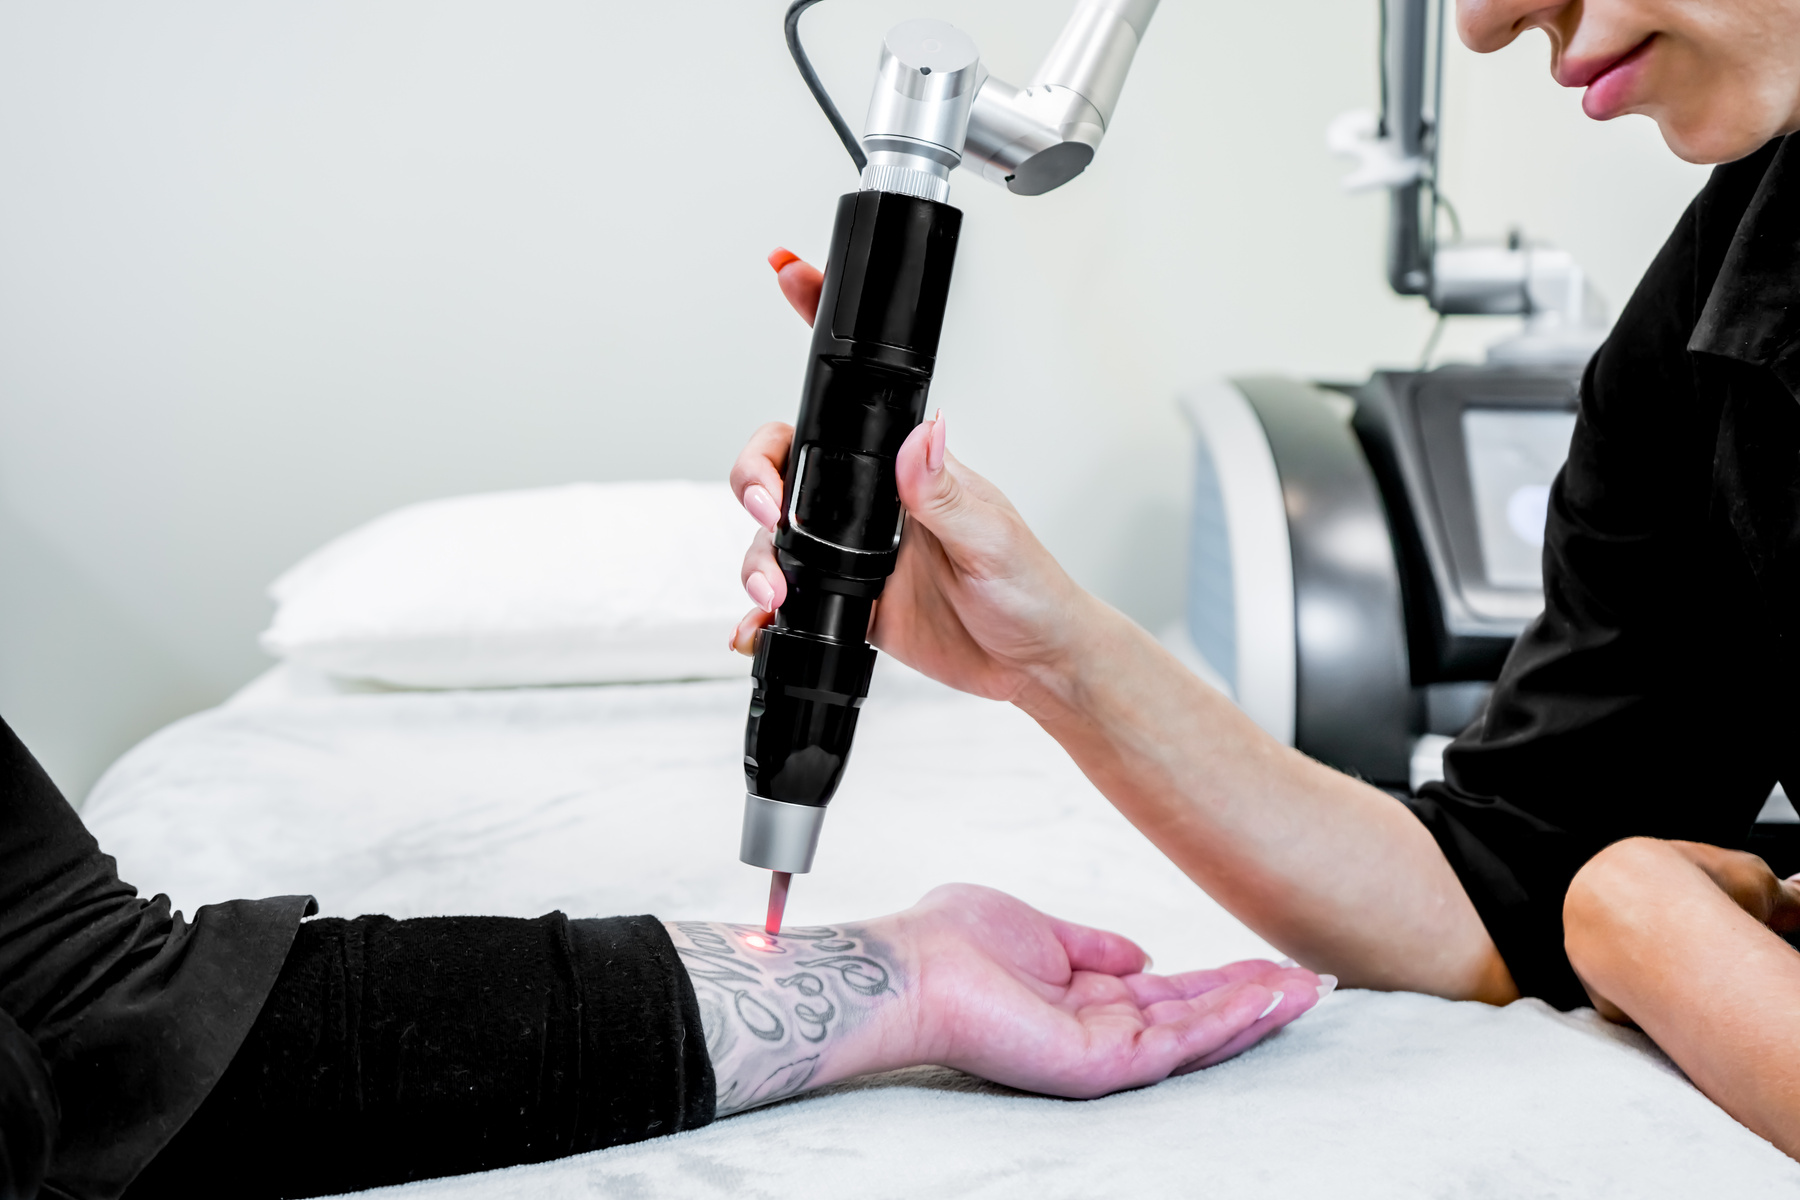 Laser tattoo removal of a large tattoo on a patient's arm, using picosecond laser technology, in a beauty and medical laser clinic. Technician is holding the hand piece.